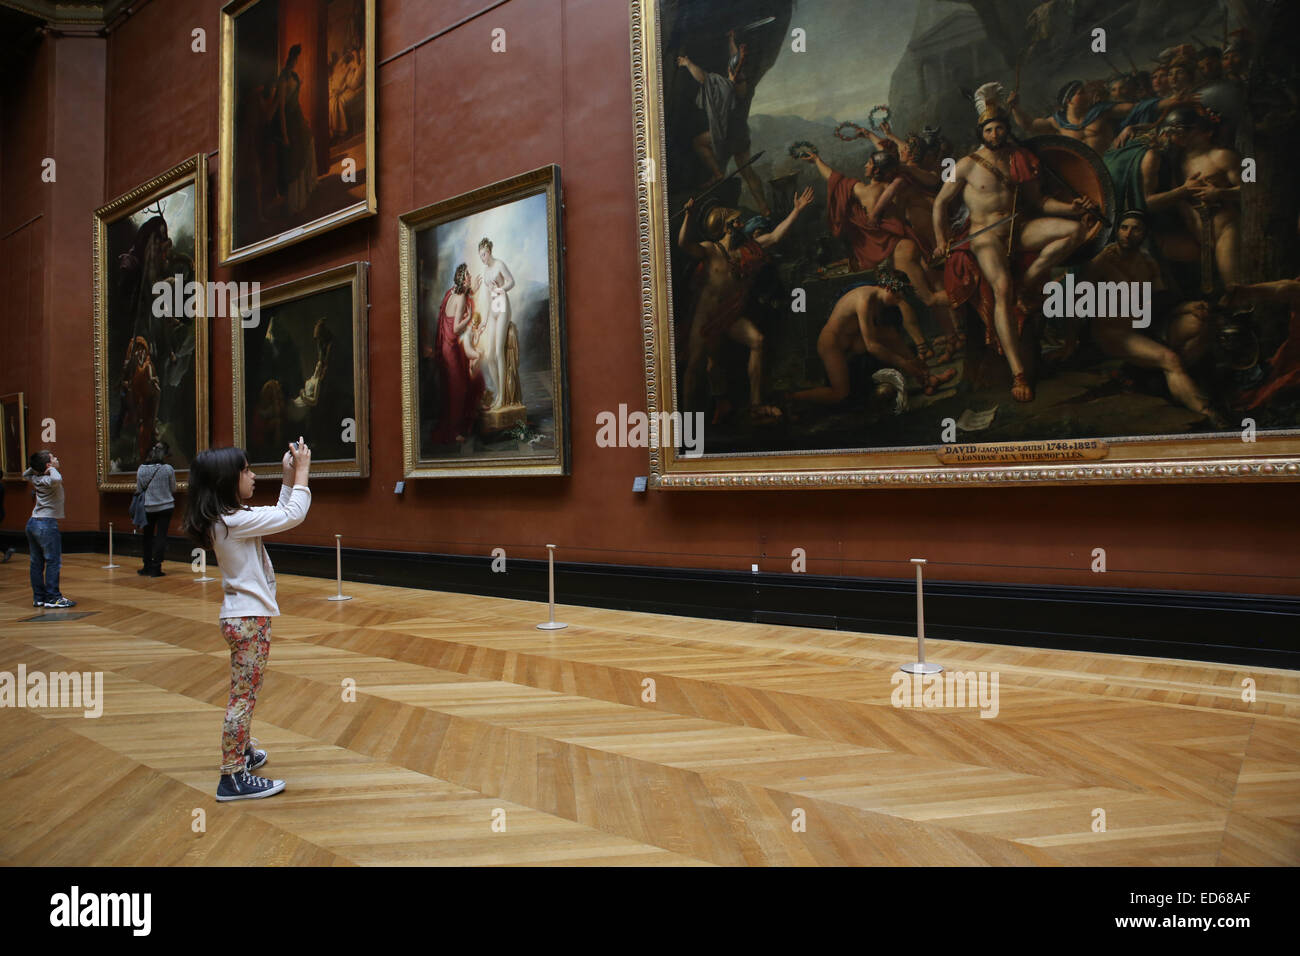 young girl taking photo inside Louvre museum art paintings Stock Photo